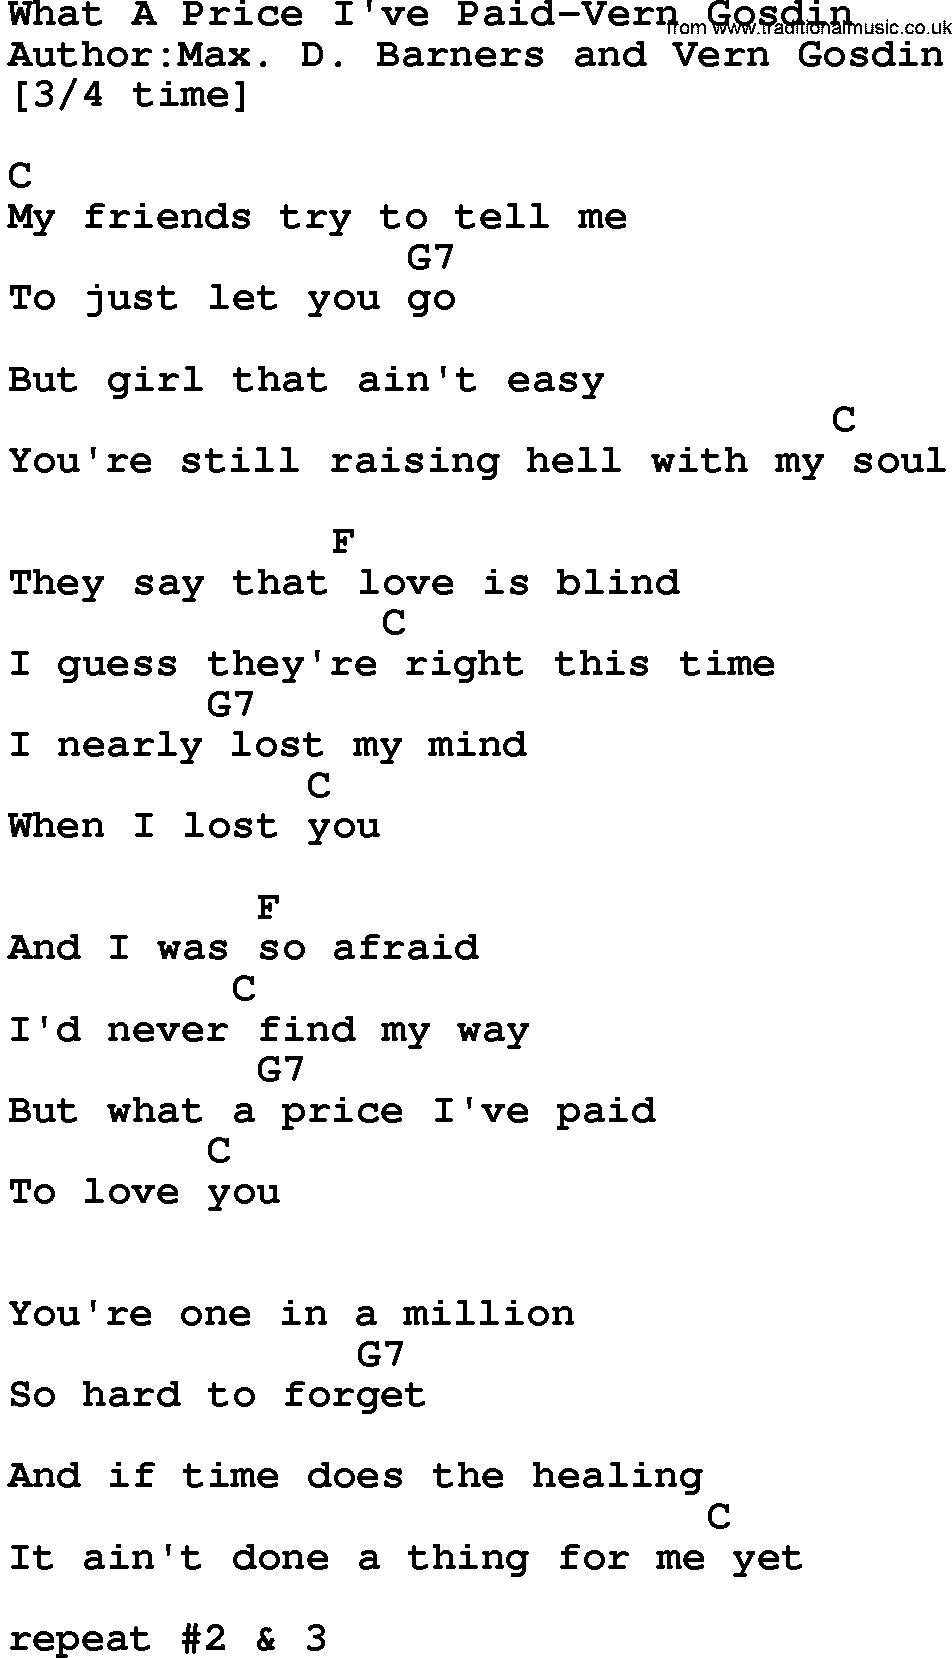 Country music song: What A Price I've Paid-Vern Gosdin lyrics and chords